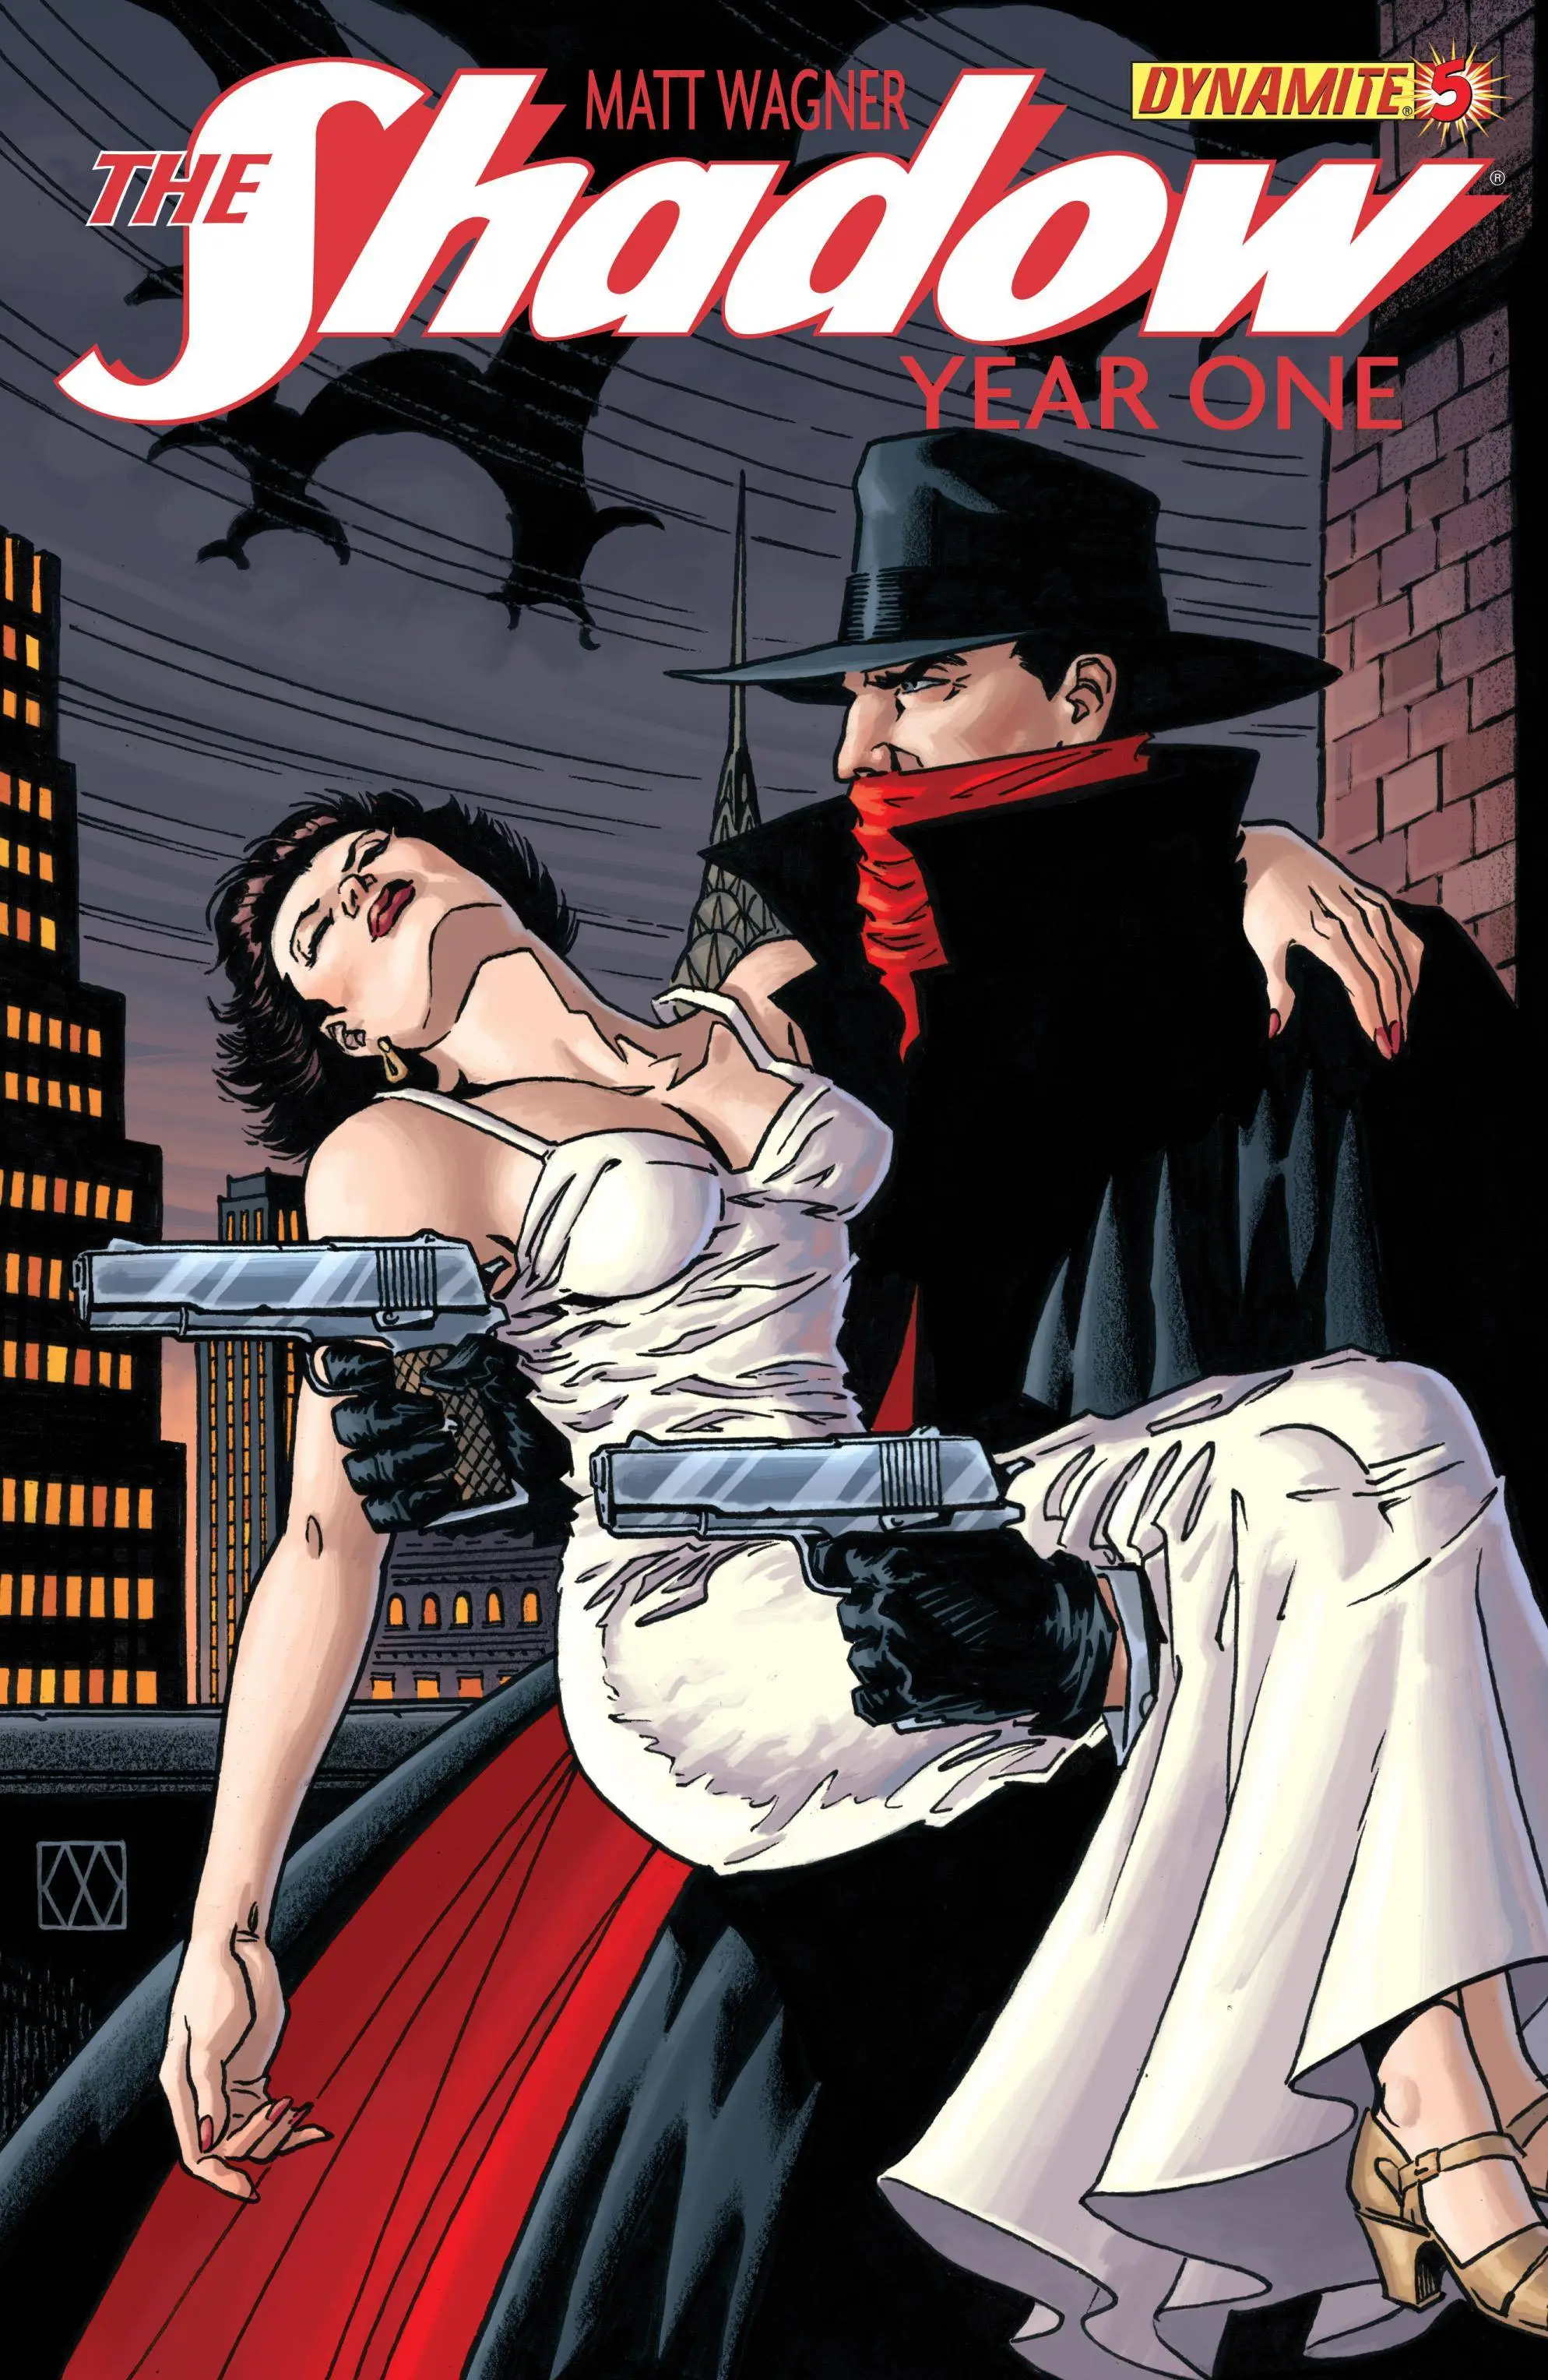 The Shadow - Year One 05 (of 08) (2013) (4 Covers) (Digital) (Darkness-Empire)